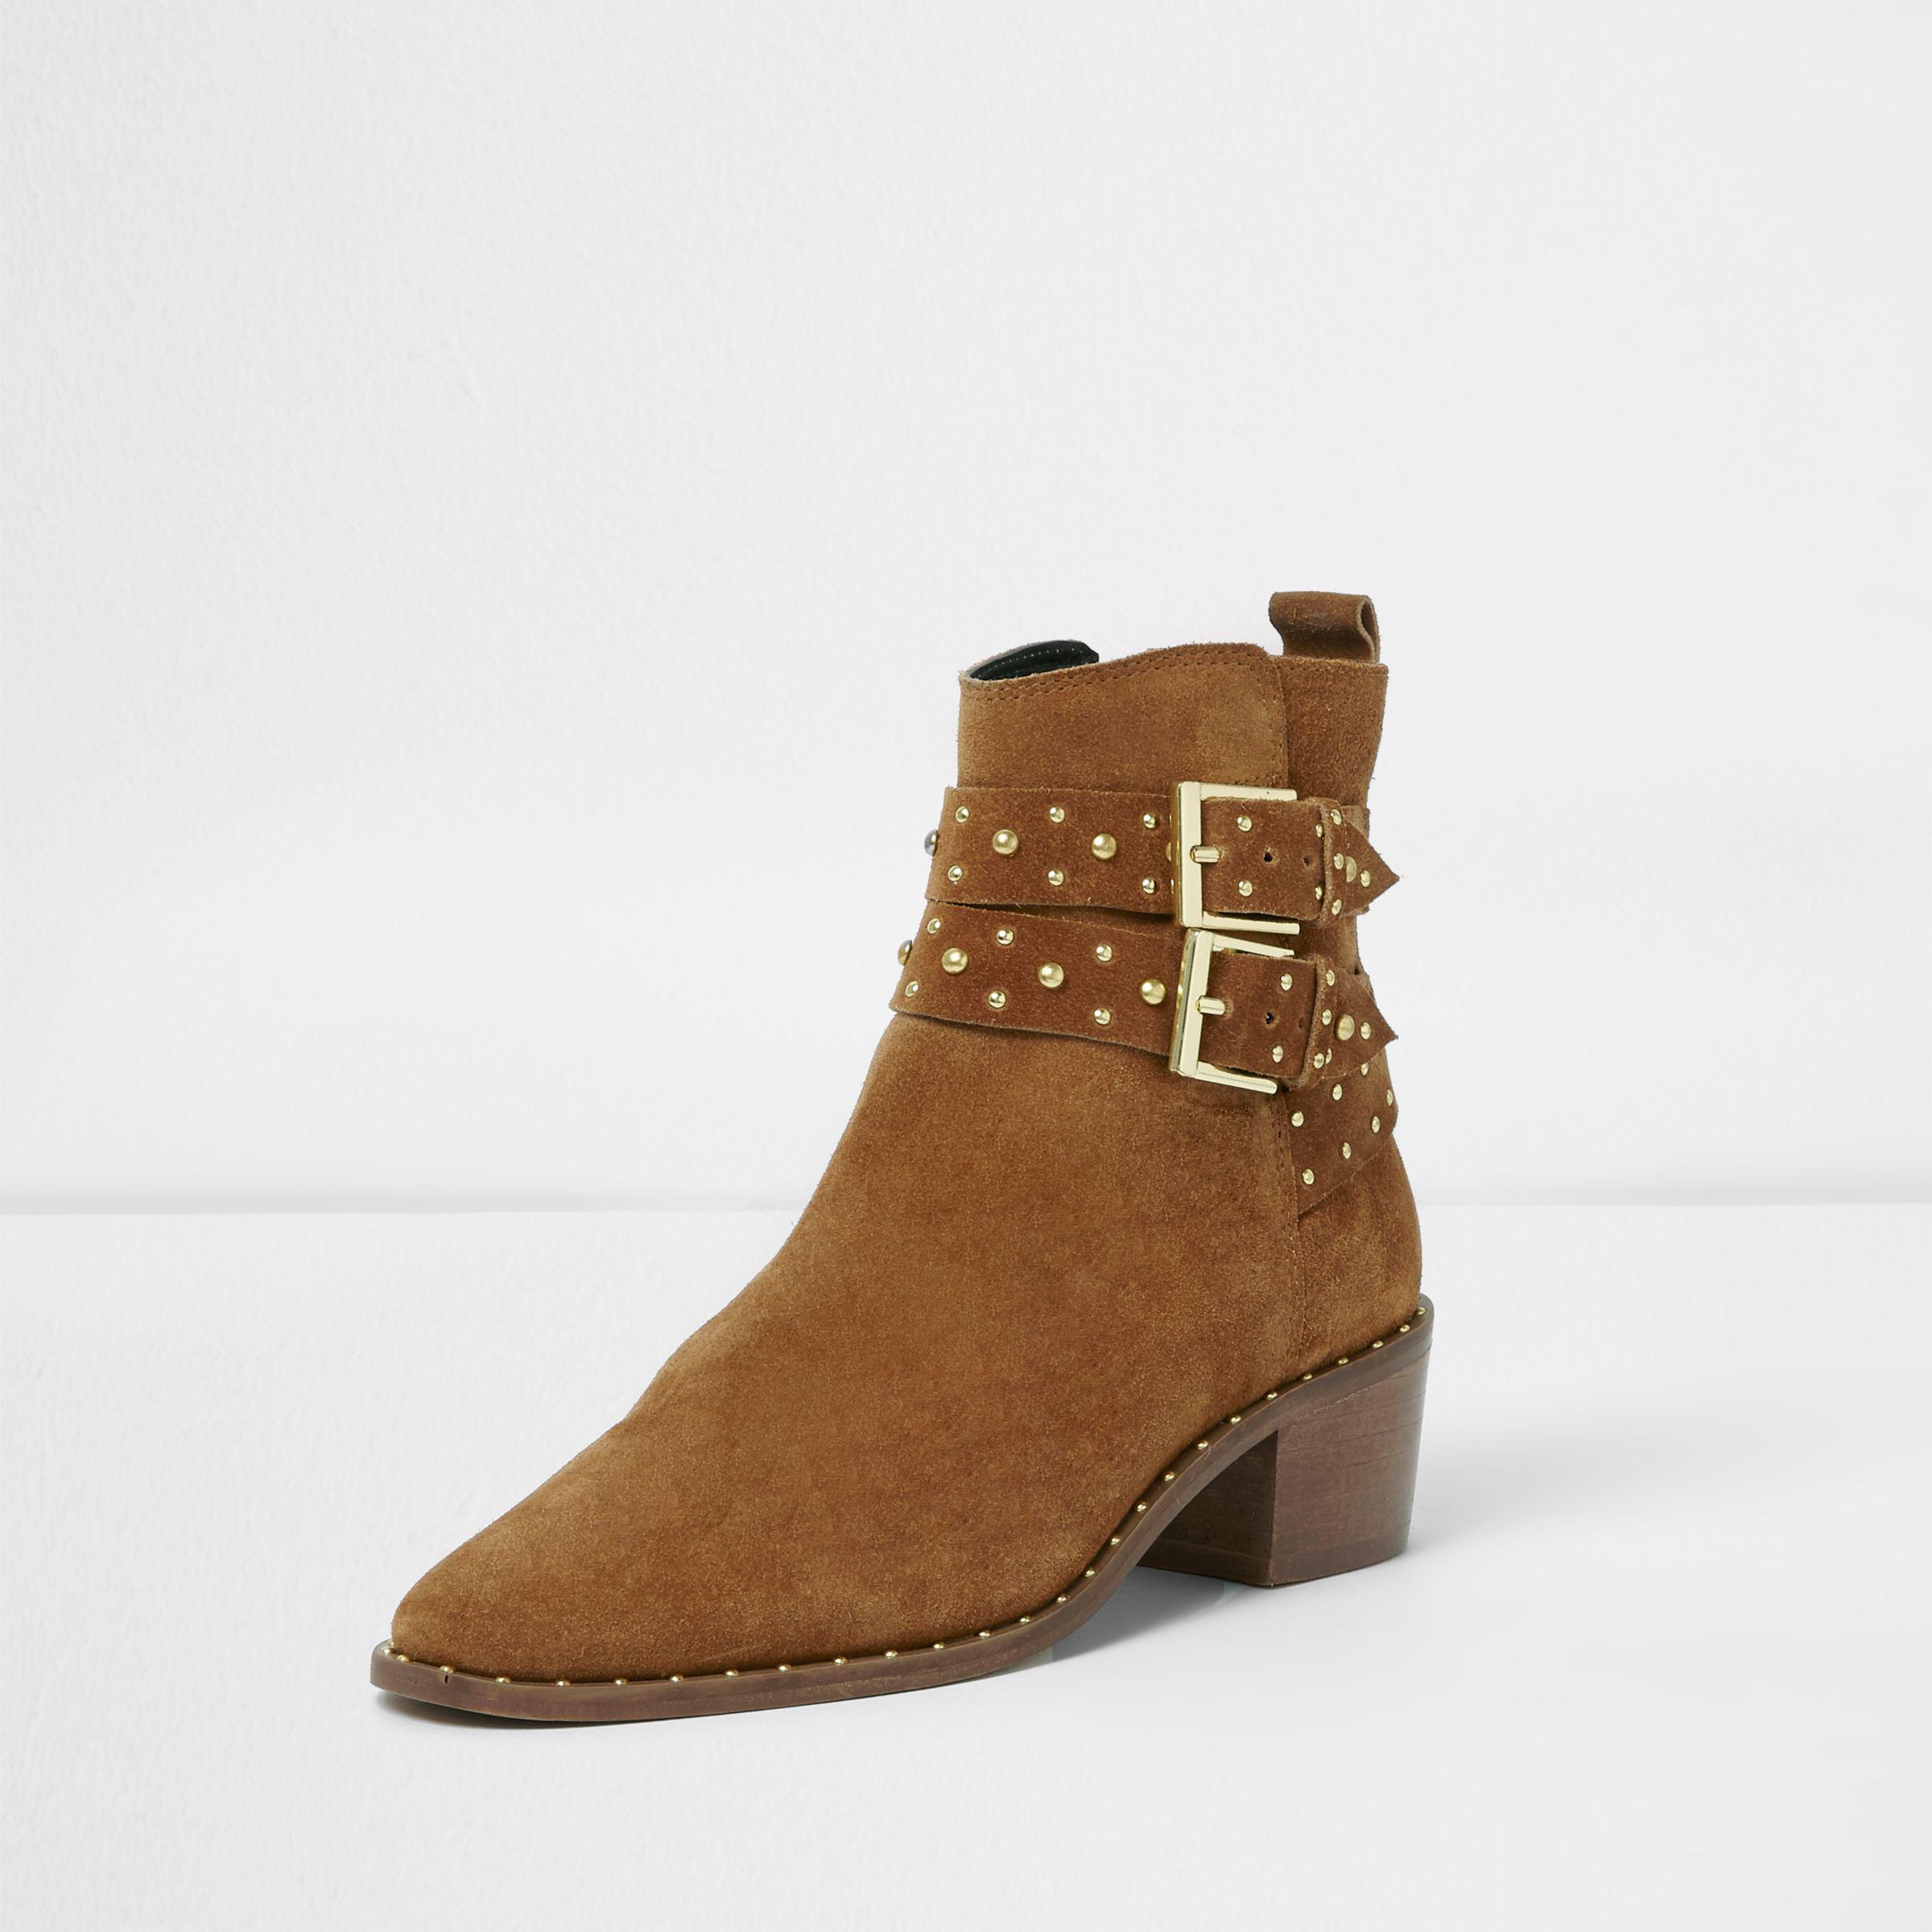 River Island Suede Tan Double Buckle 